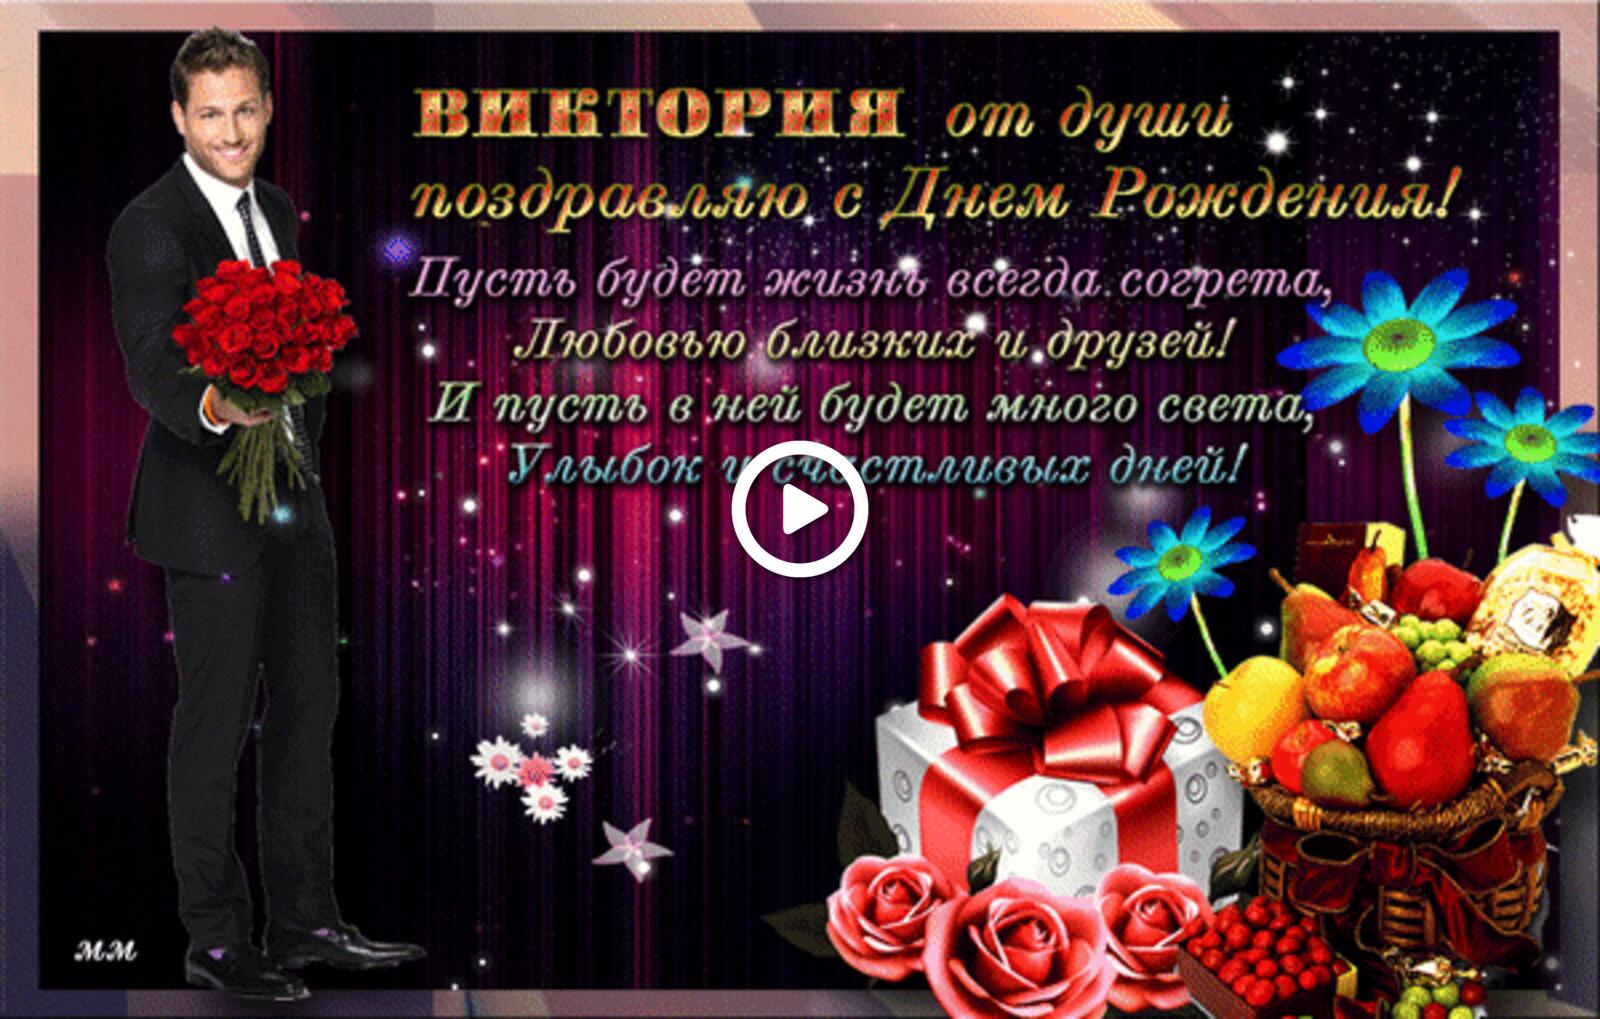 A postcard on the subject of vika Victoria happy birthday for free